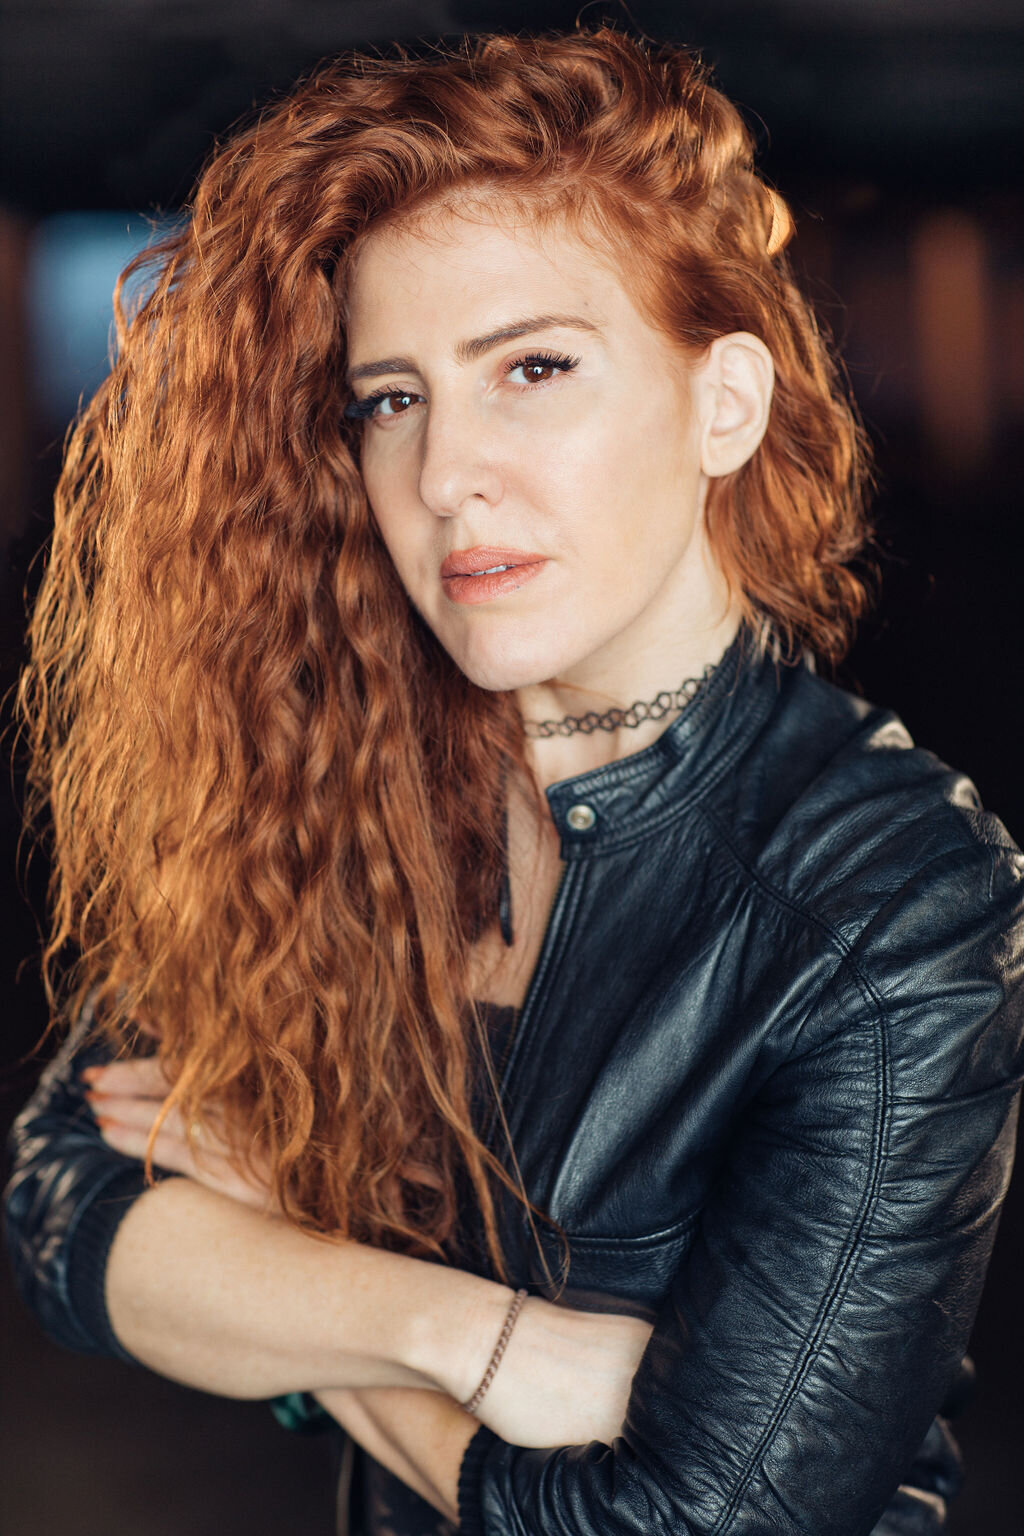 Headshot Photograph Of Woman In Outer Black Leather Jacket And Inner Black Shirt Los Angeles